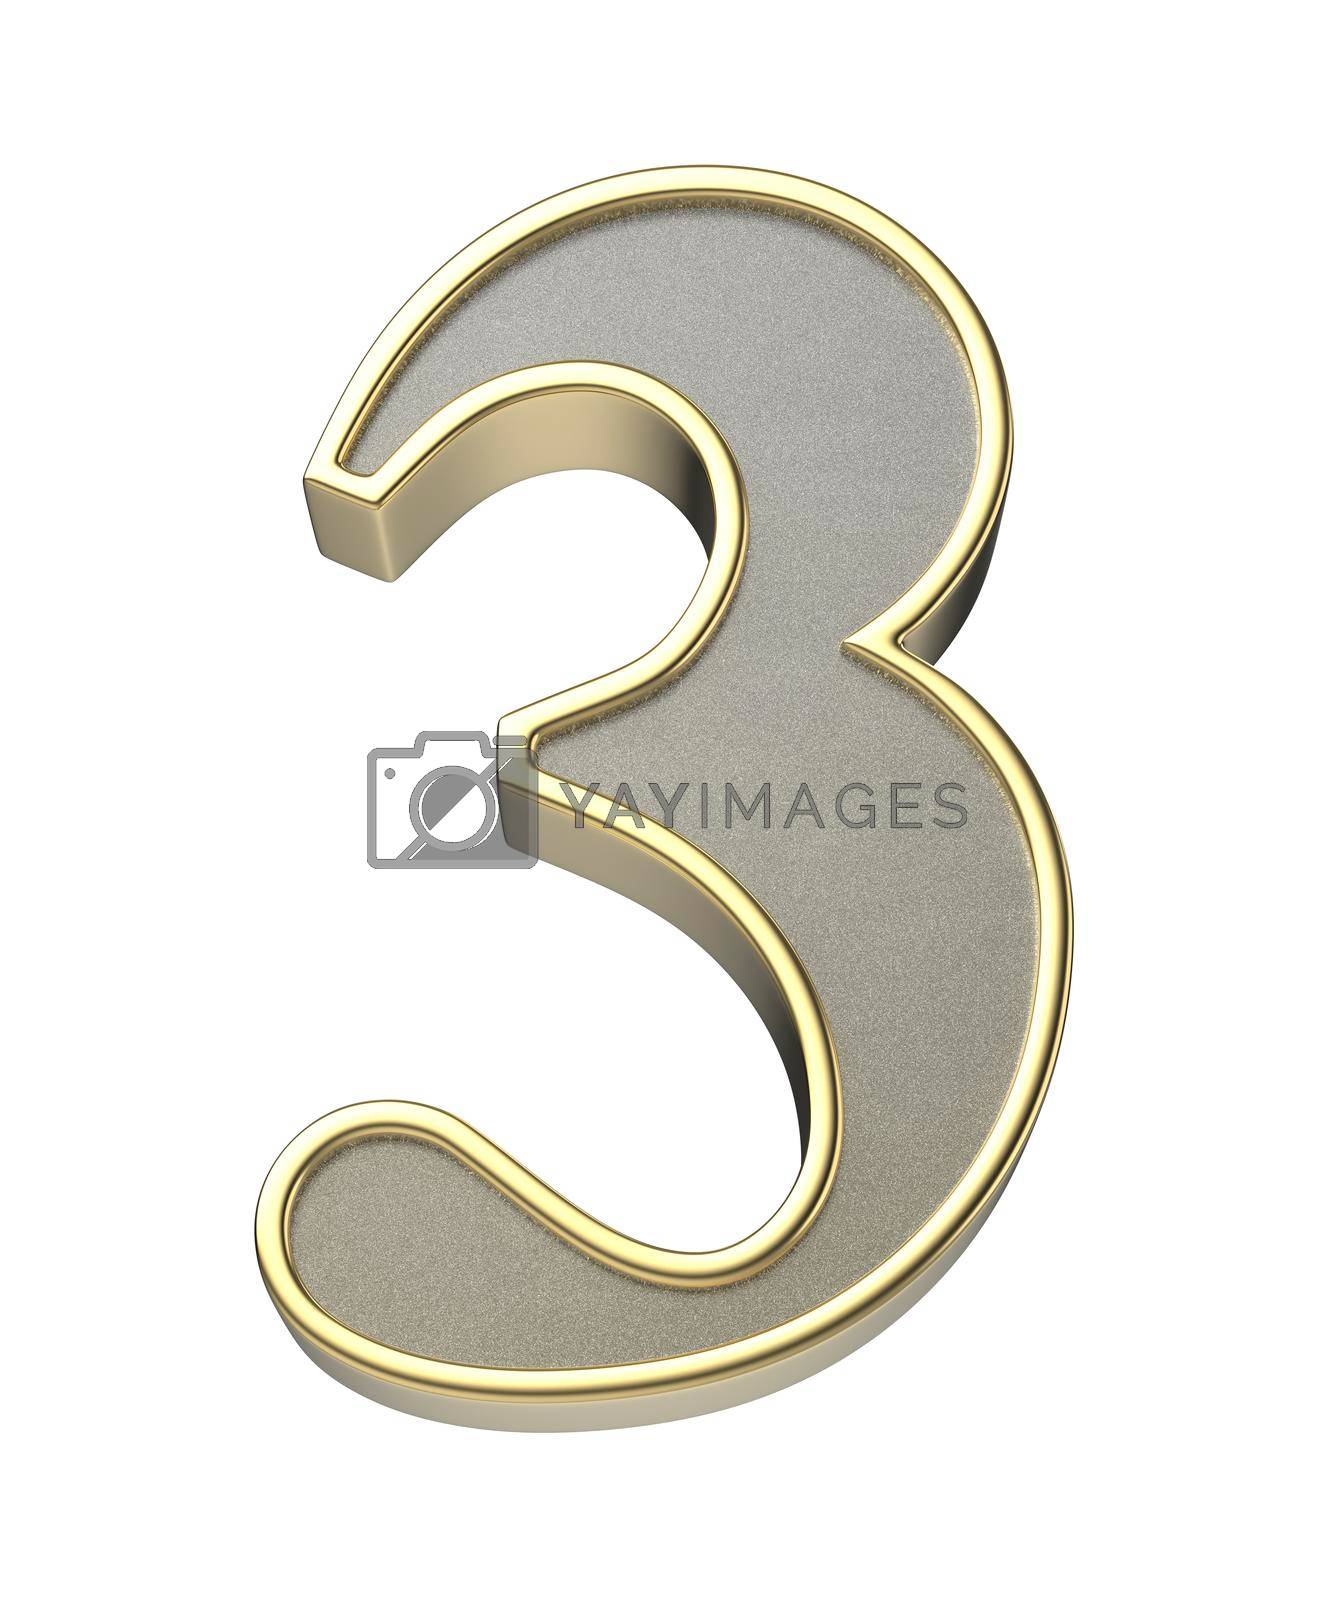 Royalty free image of Golden number 3 by magraphics